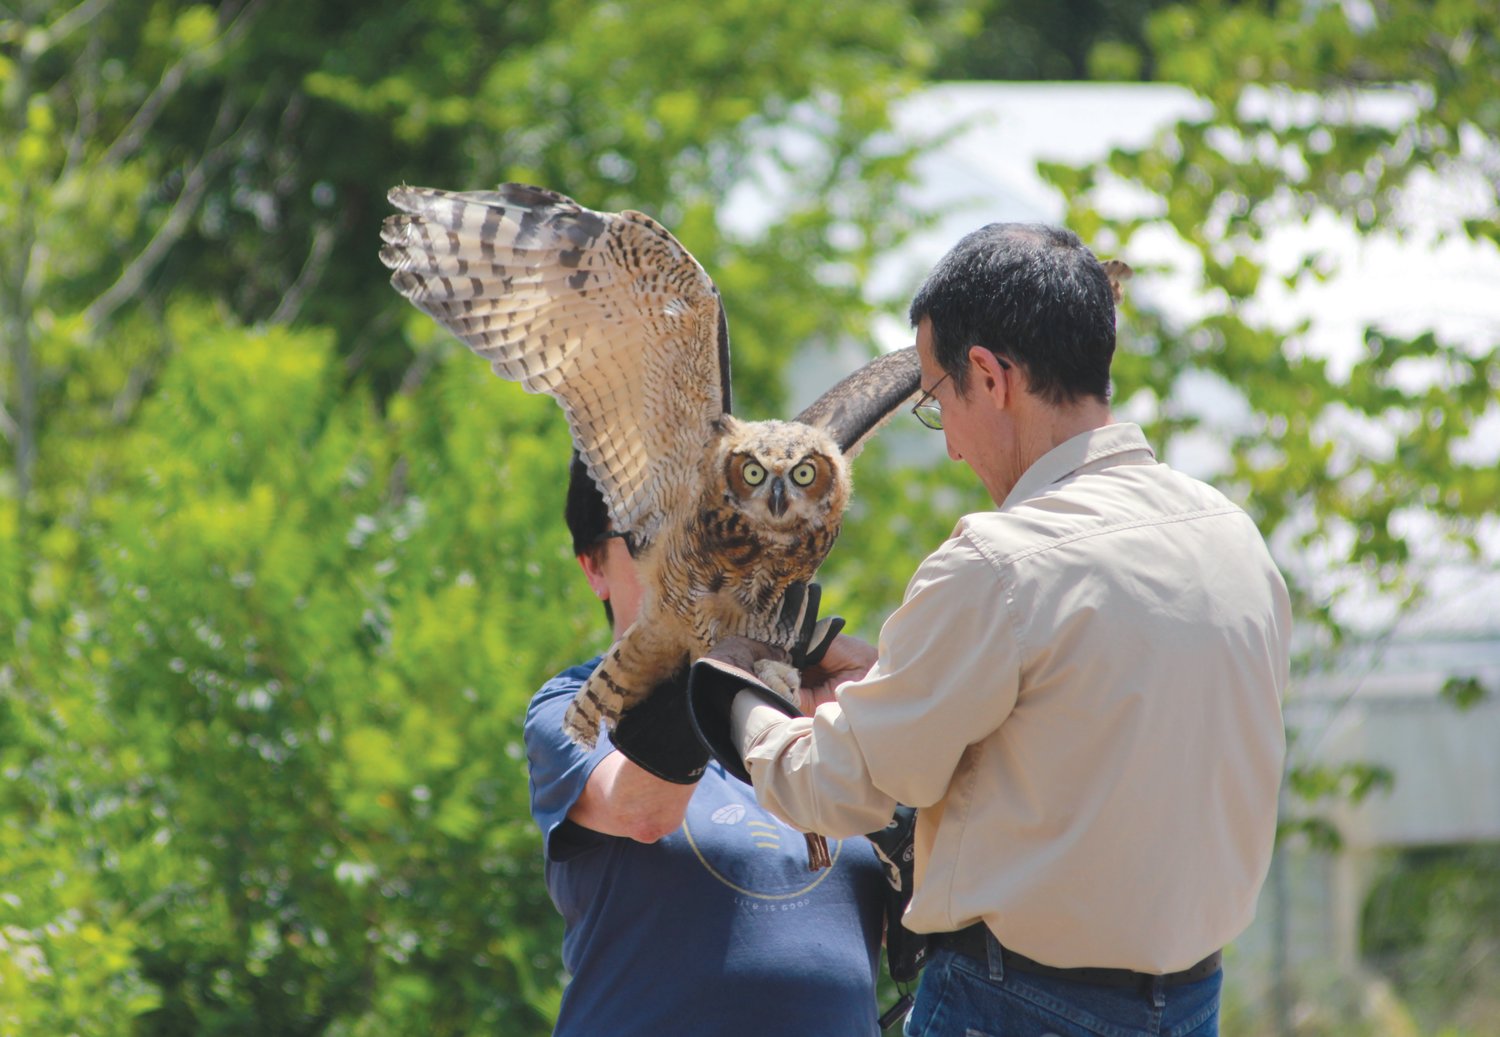 Claws Inc. volunteer and treasurer Vincent Mammone hands one of two great horned owls to another volunteer to prepare for its release at the Claws wildlife education event on Saturday at Starrlight Mead in Pittsboro.